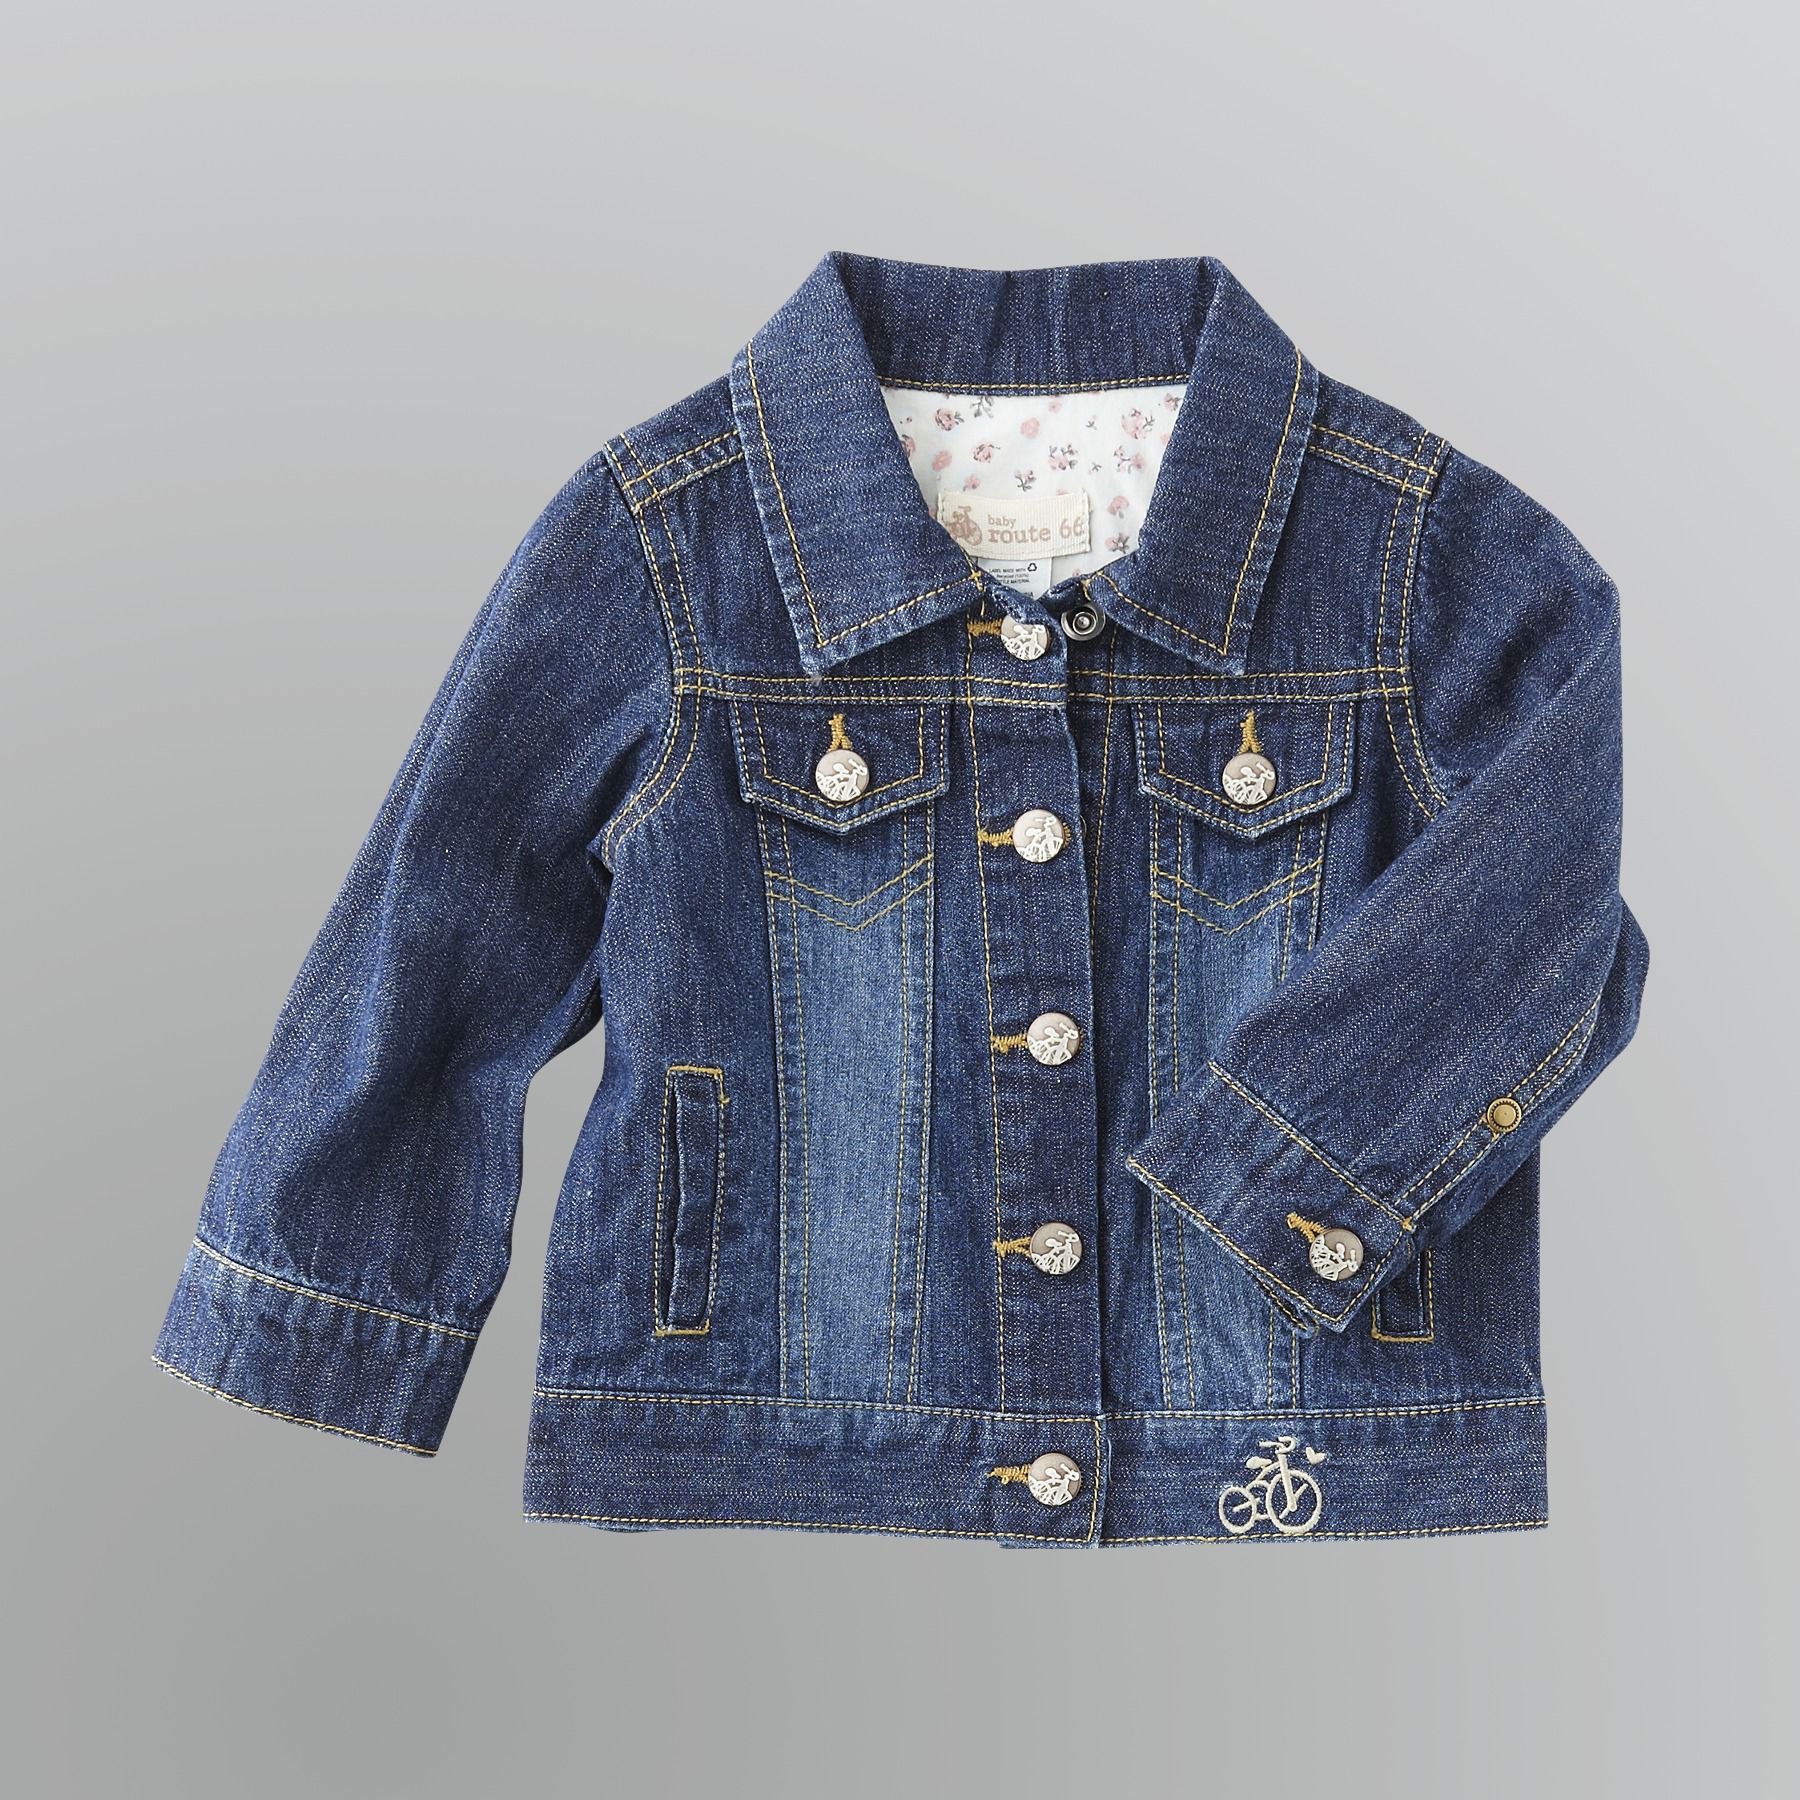 Route 66 Infant and Toddler Girl's Denim Jacket